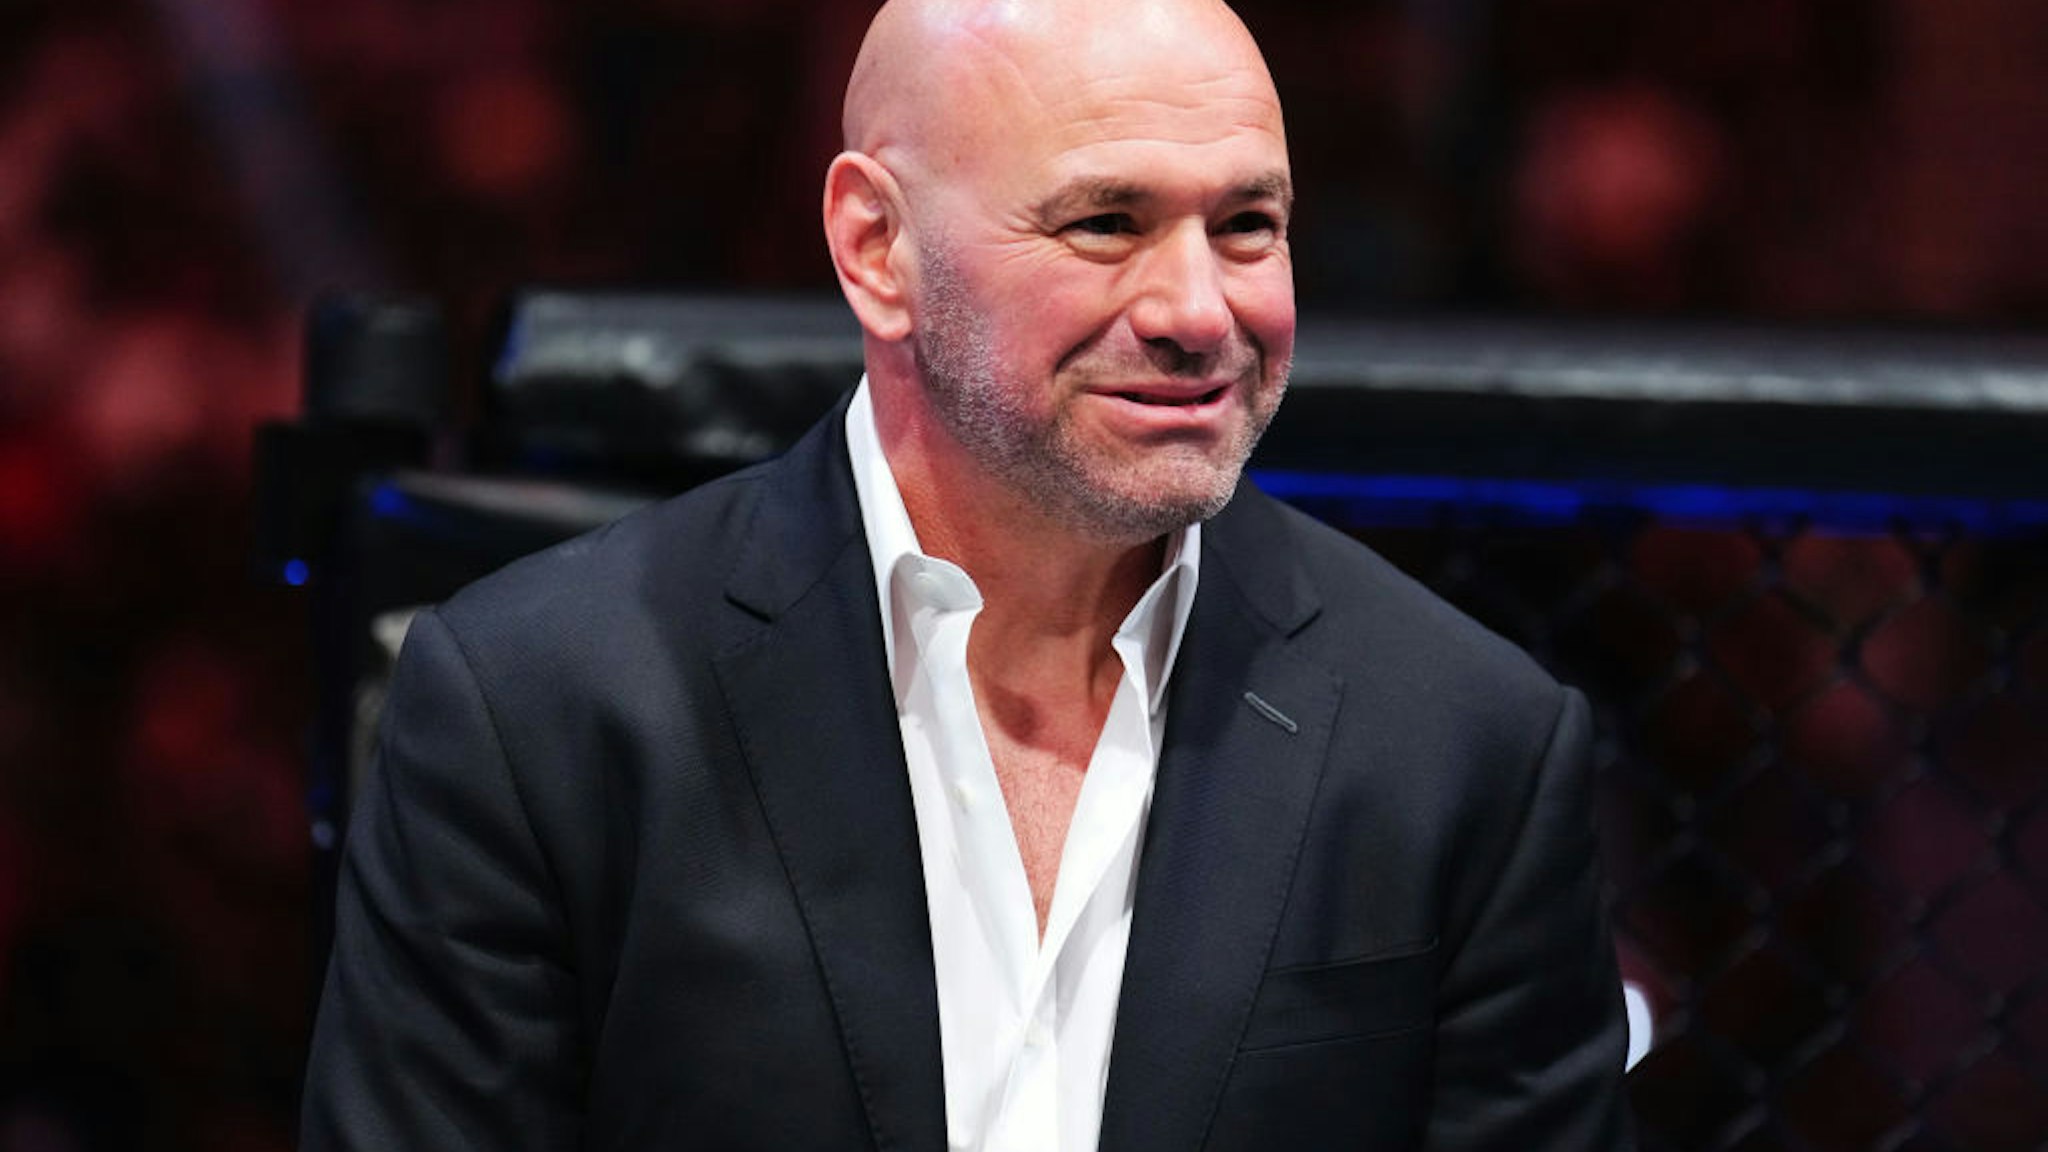 LAS VEGAS, NEVADA - JULY 08: Dana White enters the Octagon during the UFC 290 event at T-Mobile Arena on July 08, 2023 in Las Vegas, Nevada. (Photo by Chris Unger/Zuffa LLC via Getty Images)